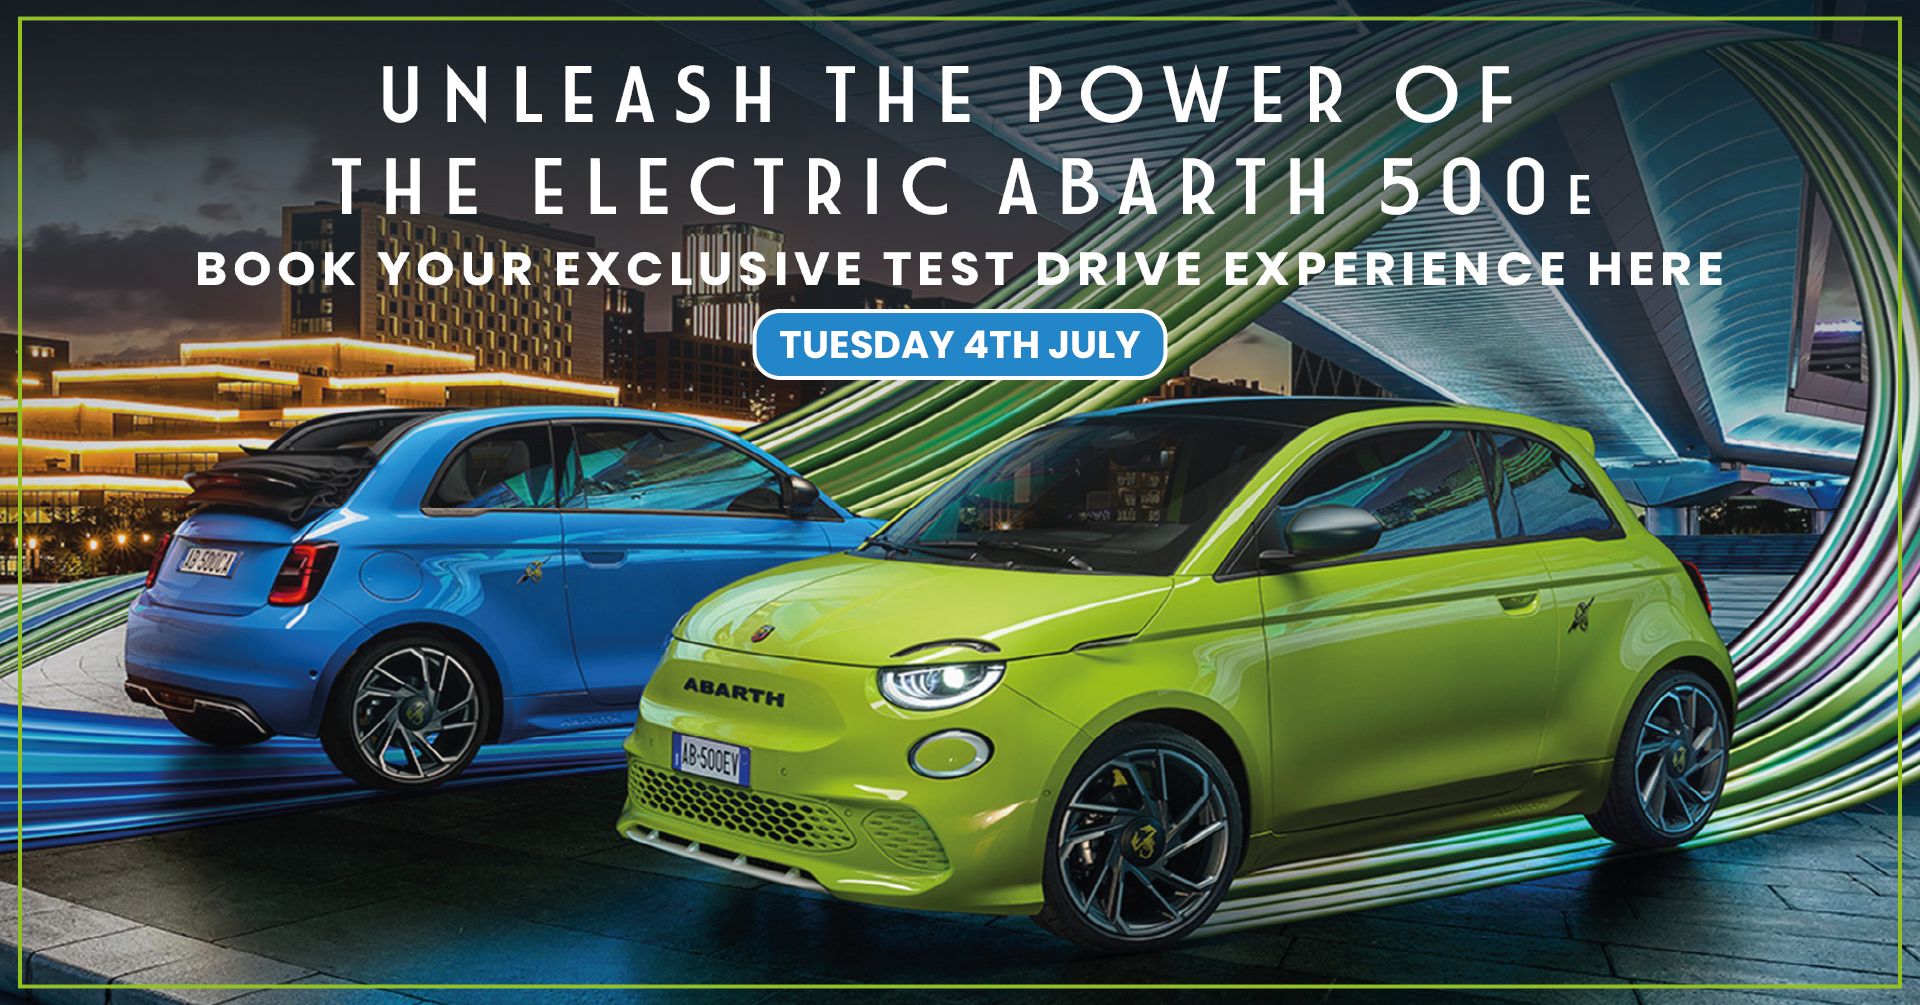 Abarth Announce Exclusive Test Drive Day - Tuesday 4th July